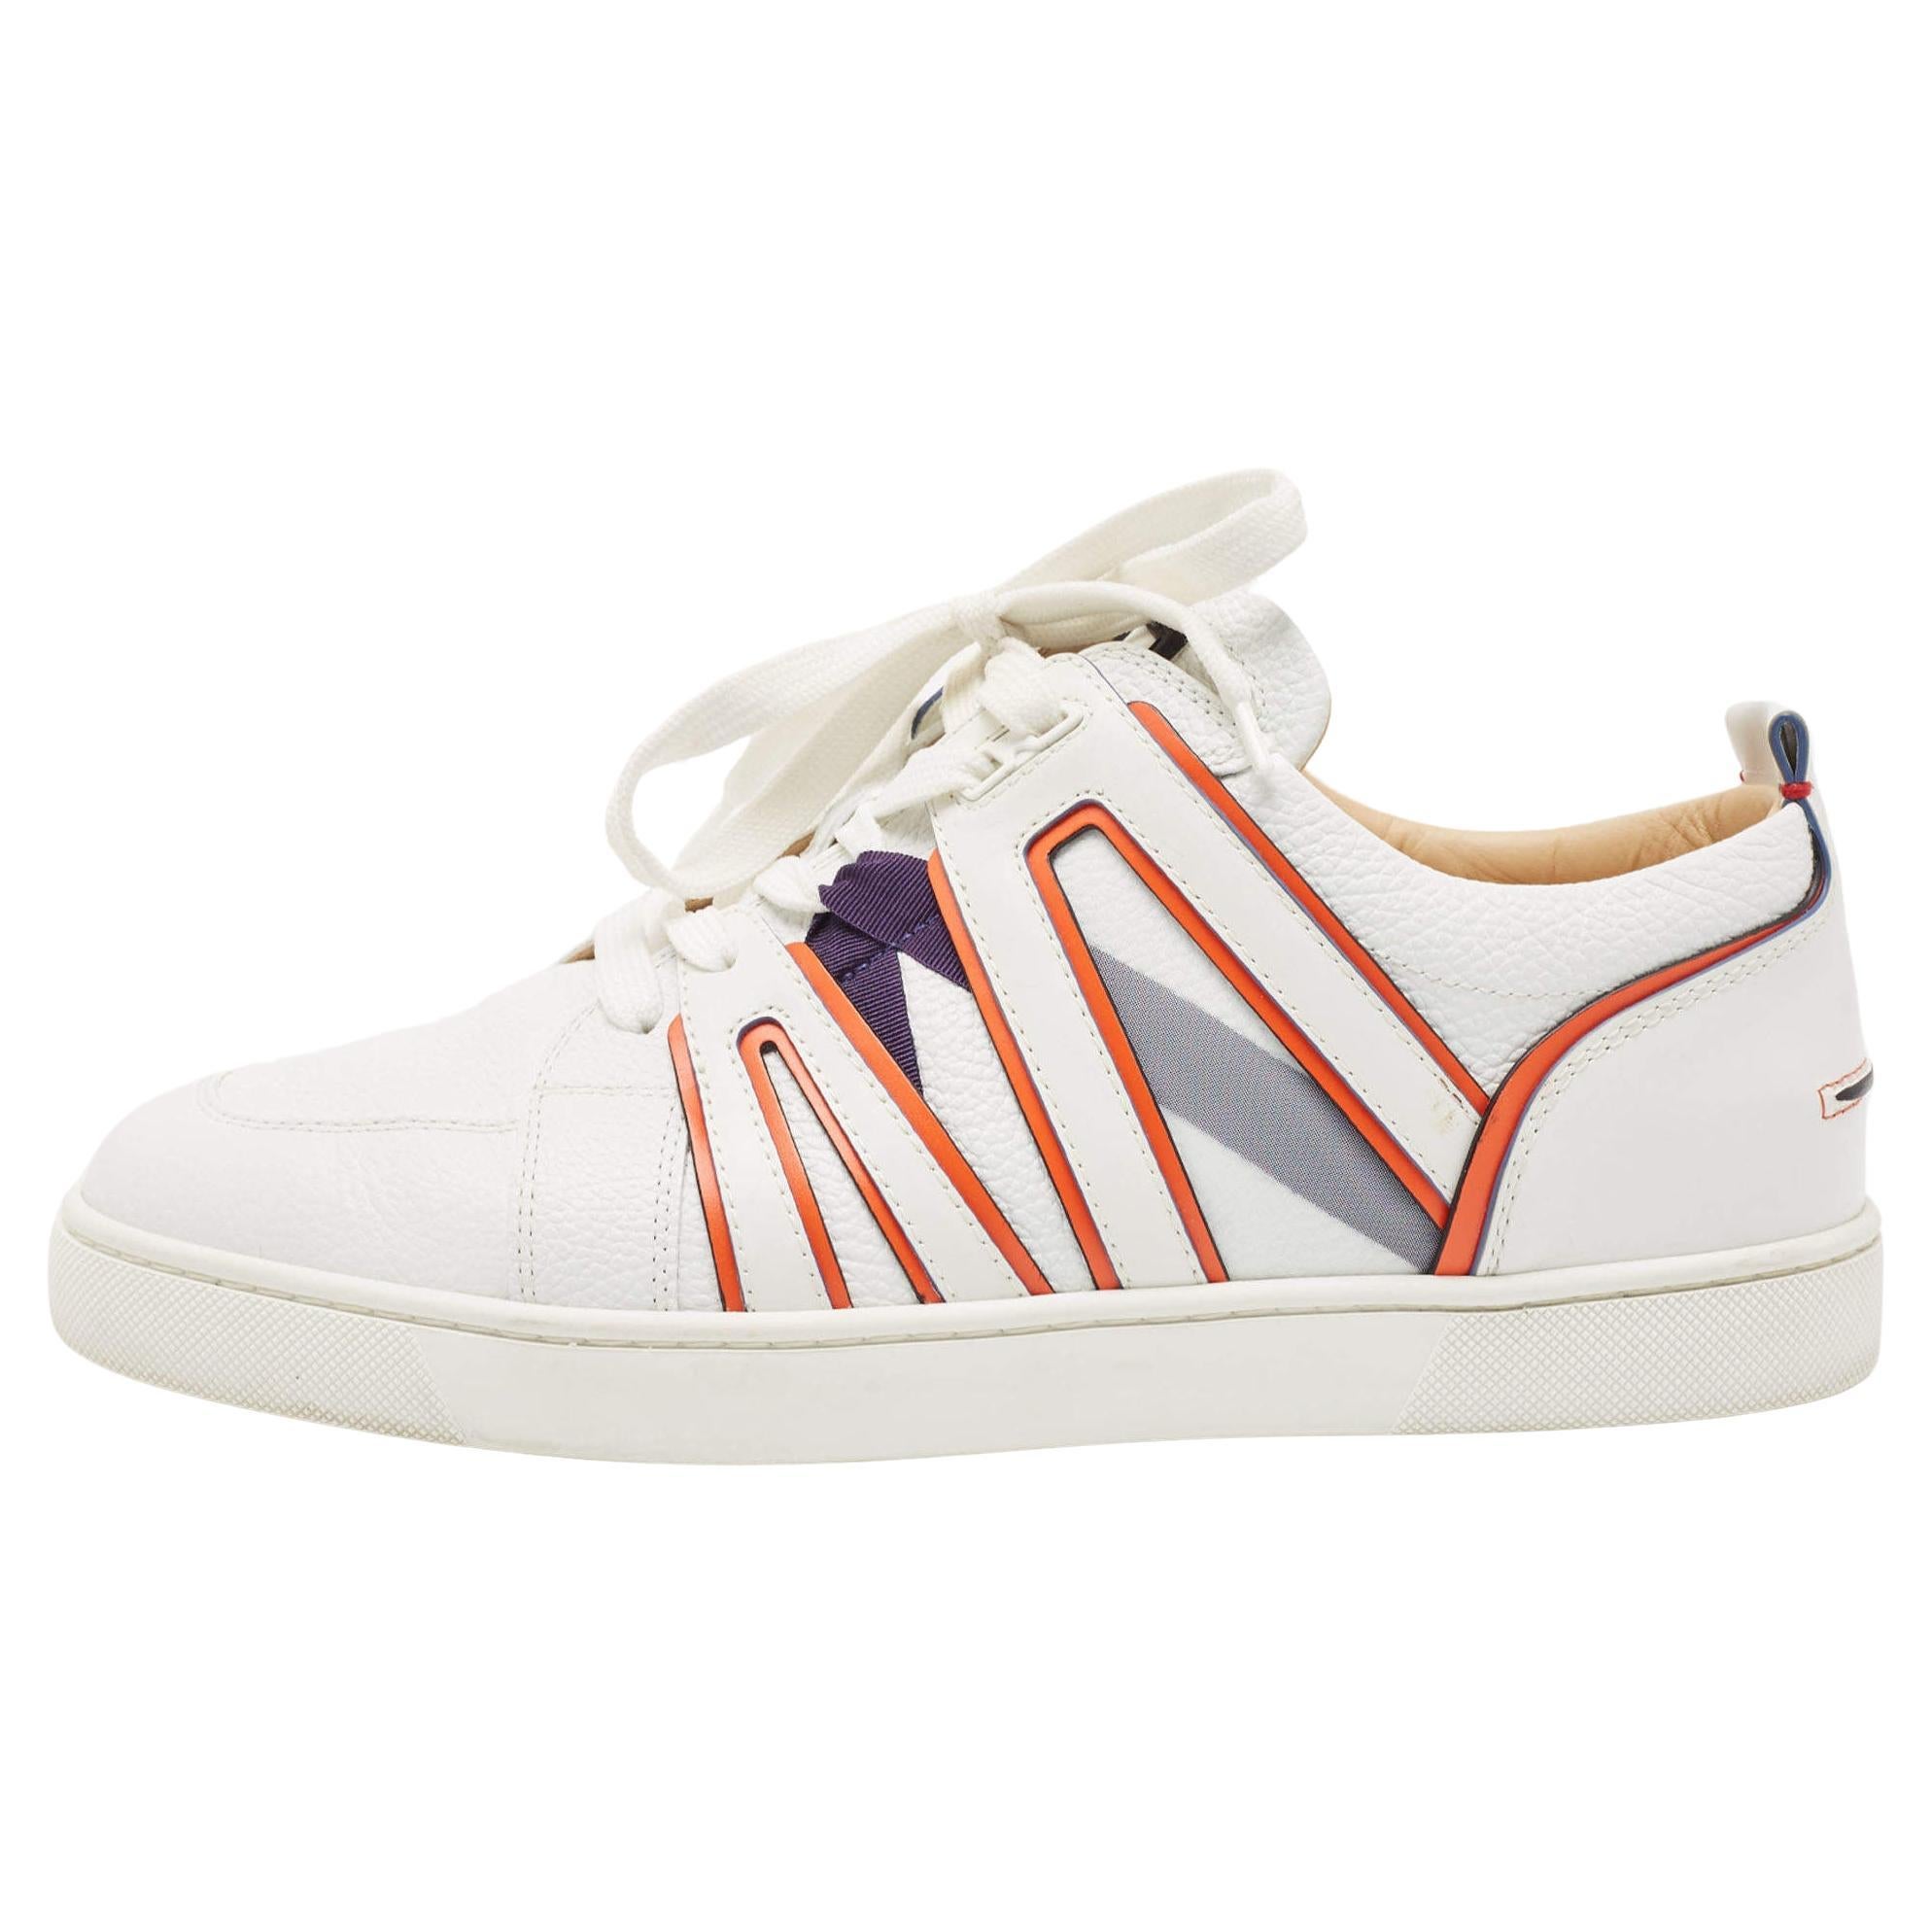 Christian Louboutin Sneakers Used - 118 For Sale on 1stDibs | christian  louboutin sneakers price, used christian louboutin sneakers, used christian  louboutin mens shoes